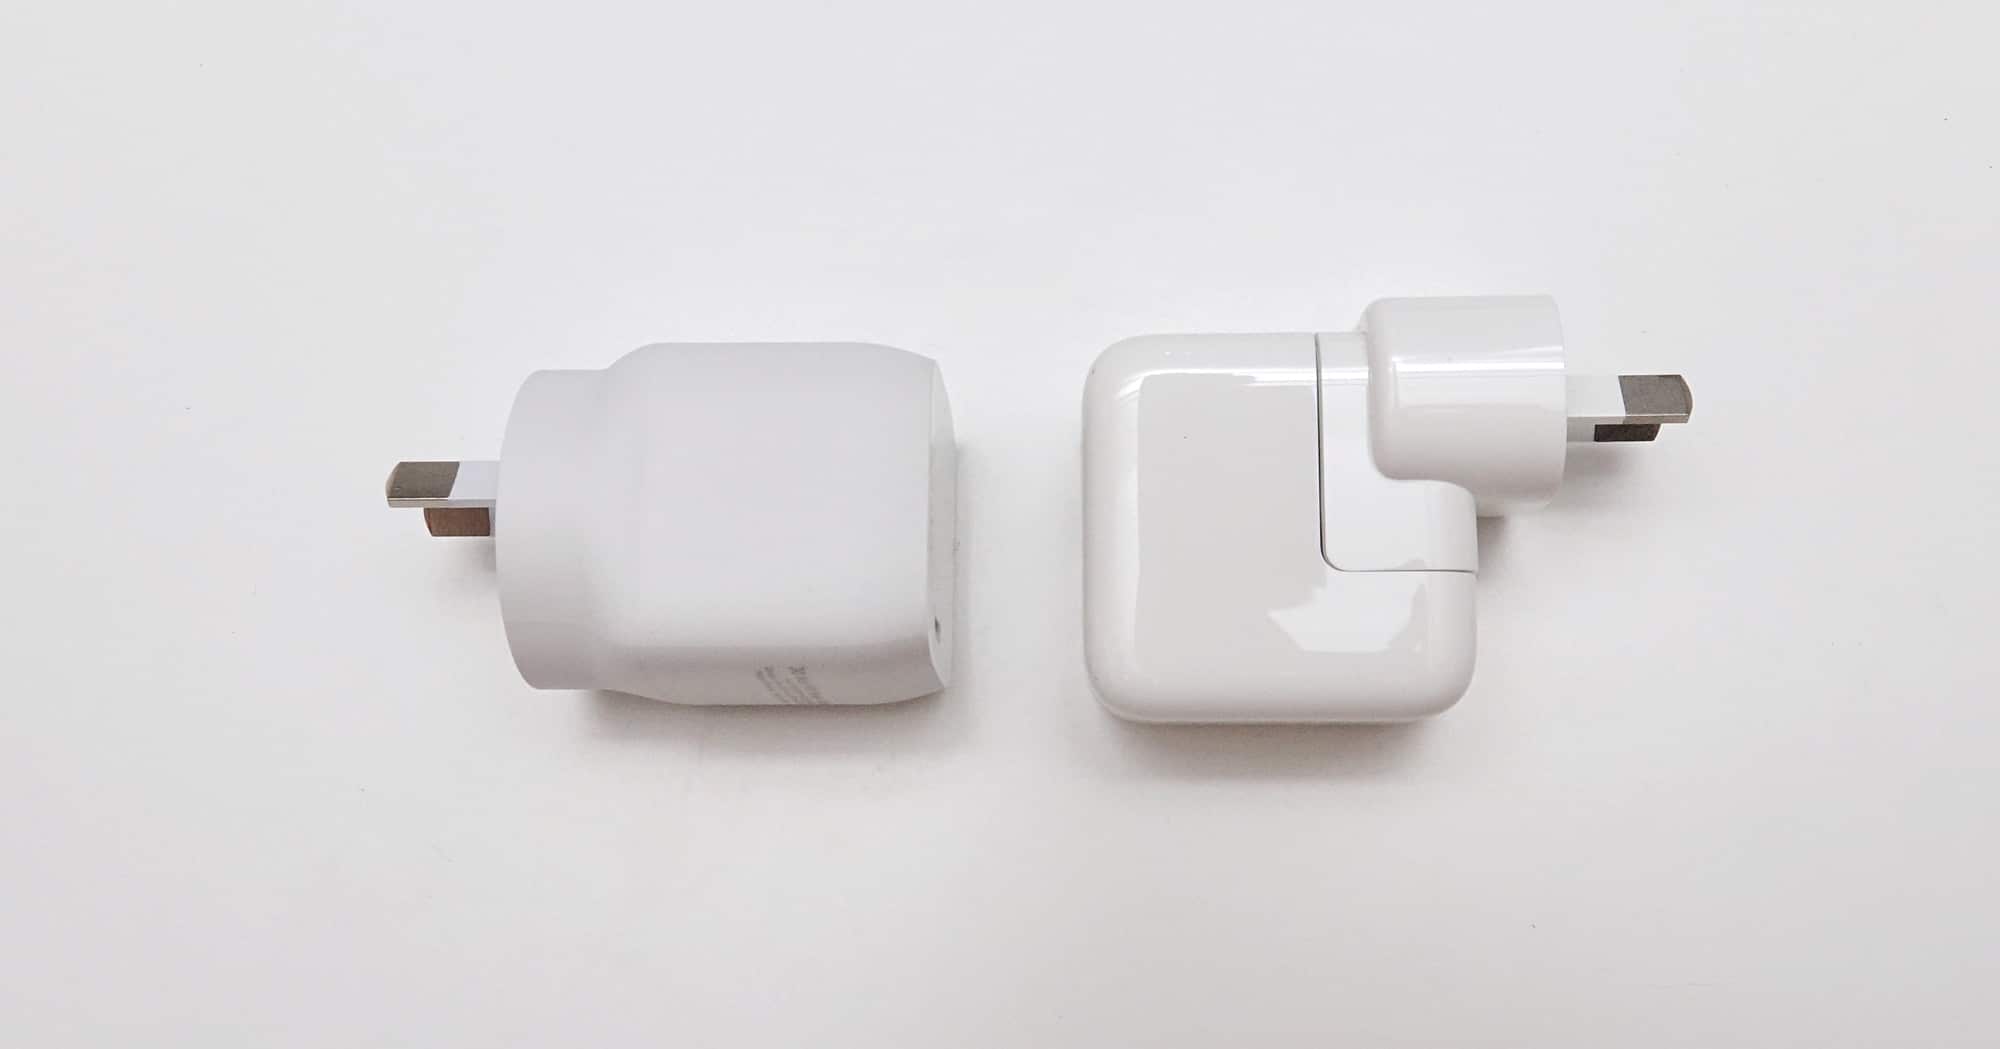 Belkin 30W GaN Boost charge pack (left) vs Apple 30W MacBook Air charge pack (right)